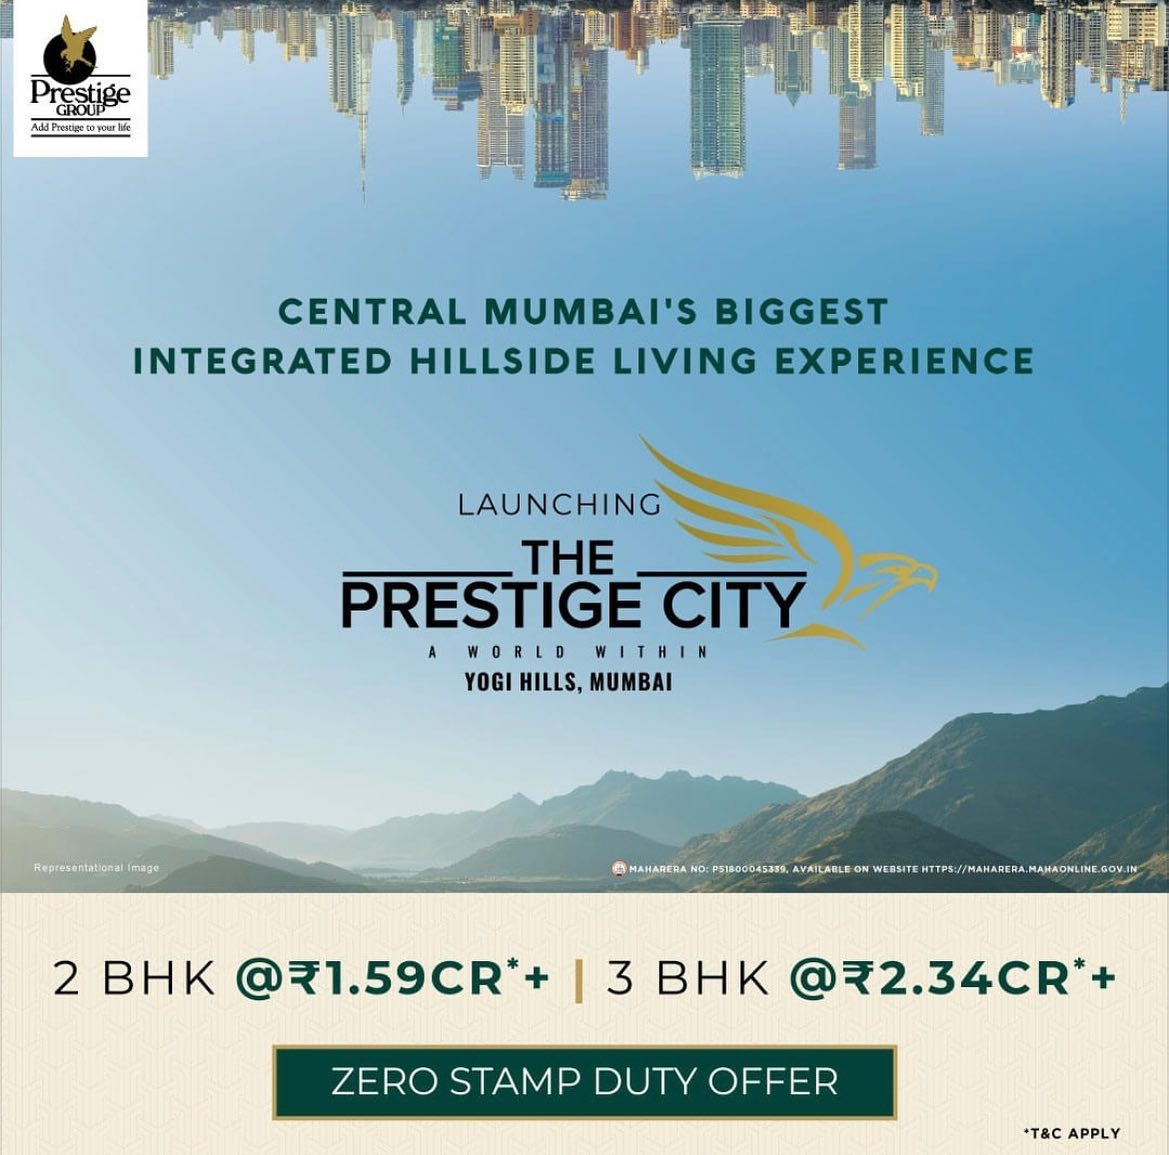 Offer 0% stamp duty at The Prestige City in Sarjapur Road, Bengalore